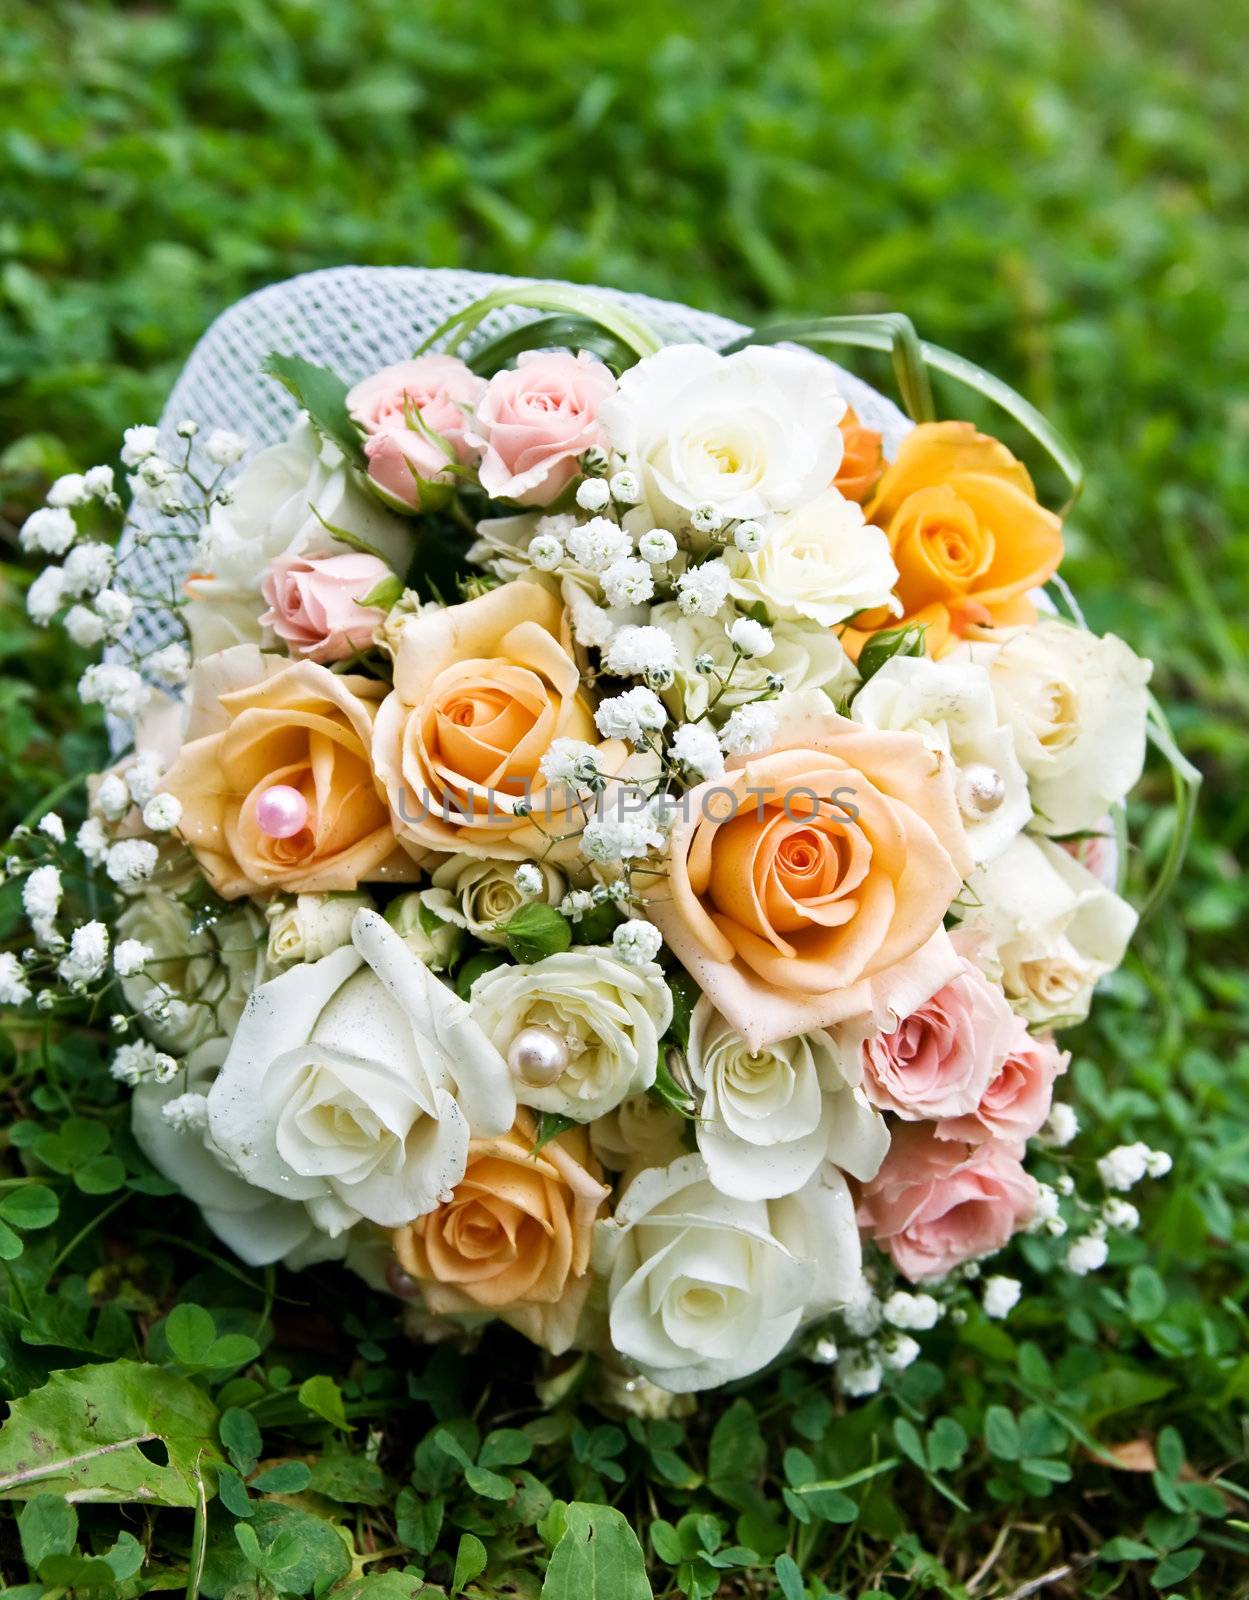 wedding bouquet of roses on green grass.